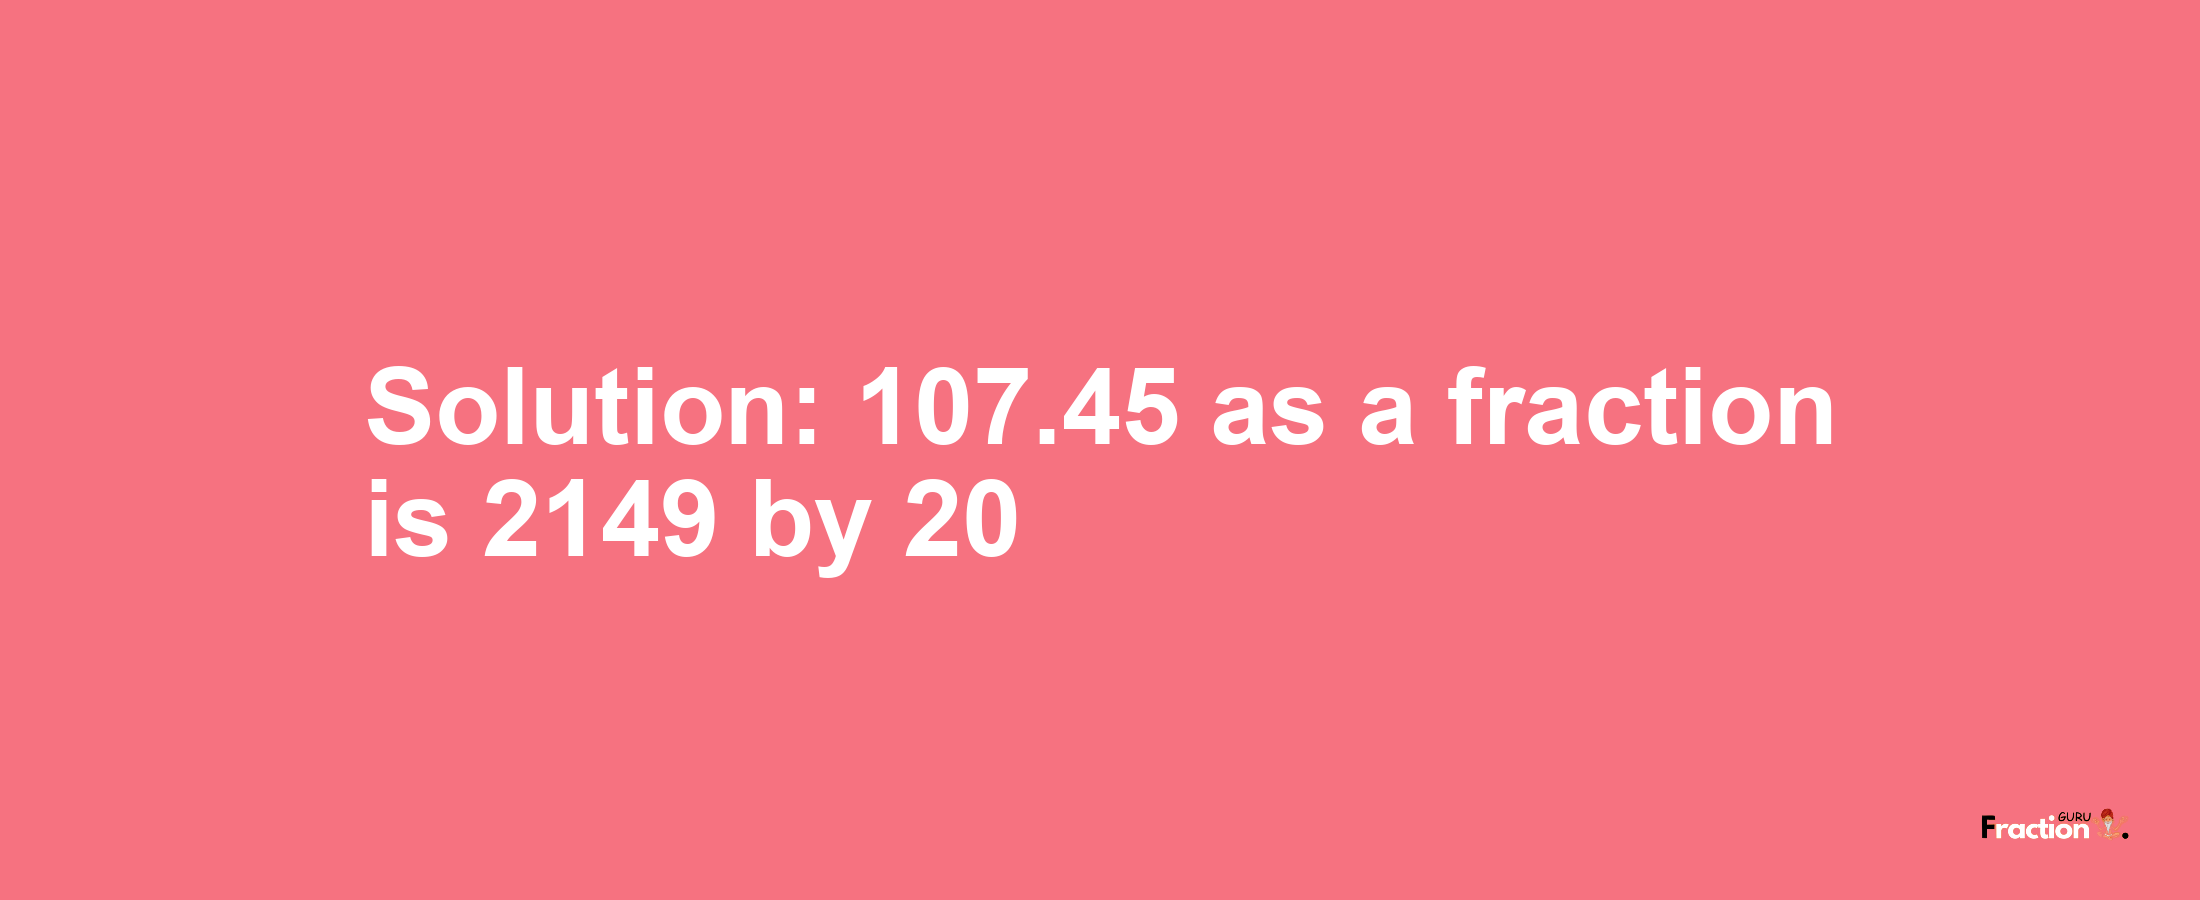 Solution:107.45 as a fraction is 2149/20